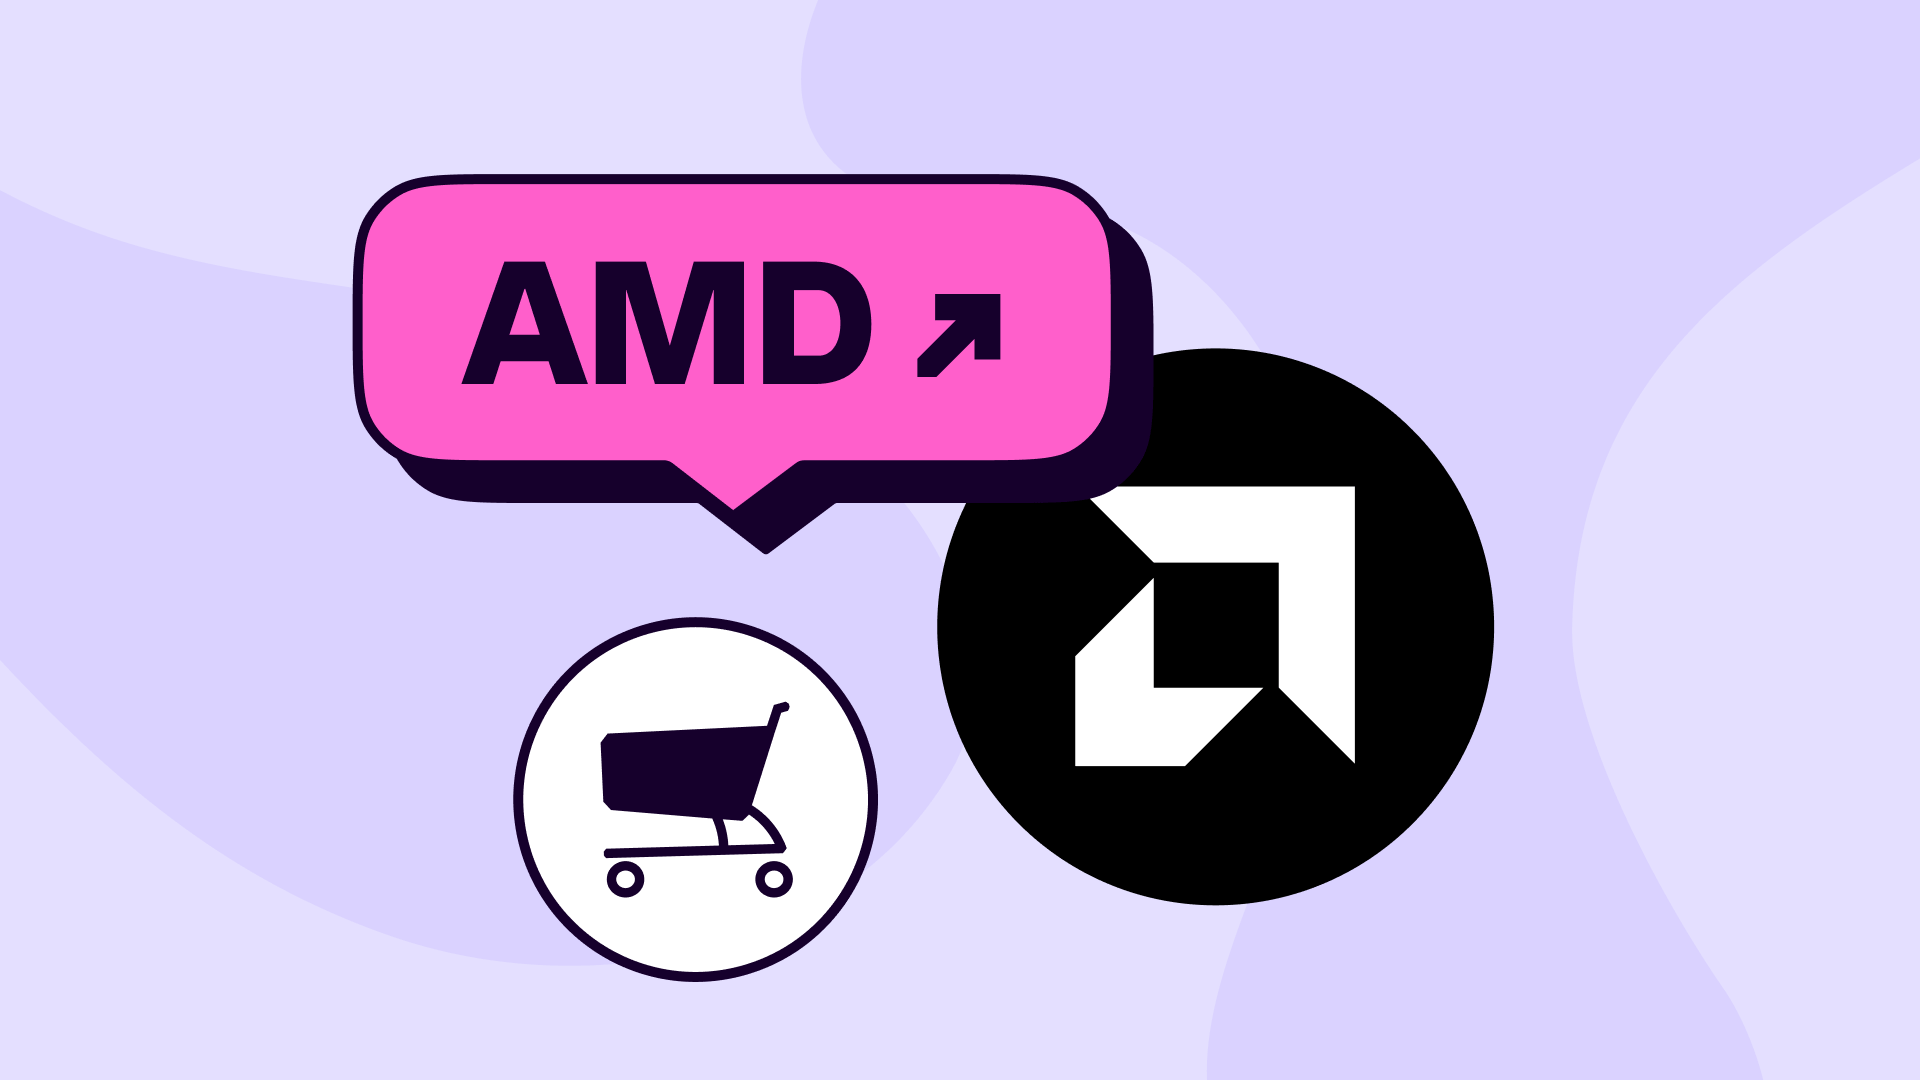 How to buy and sell AMD shares